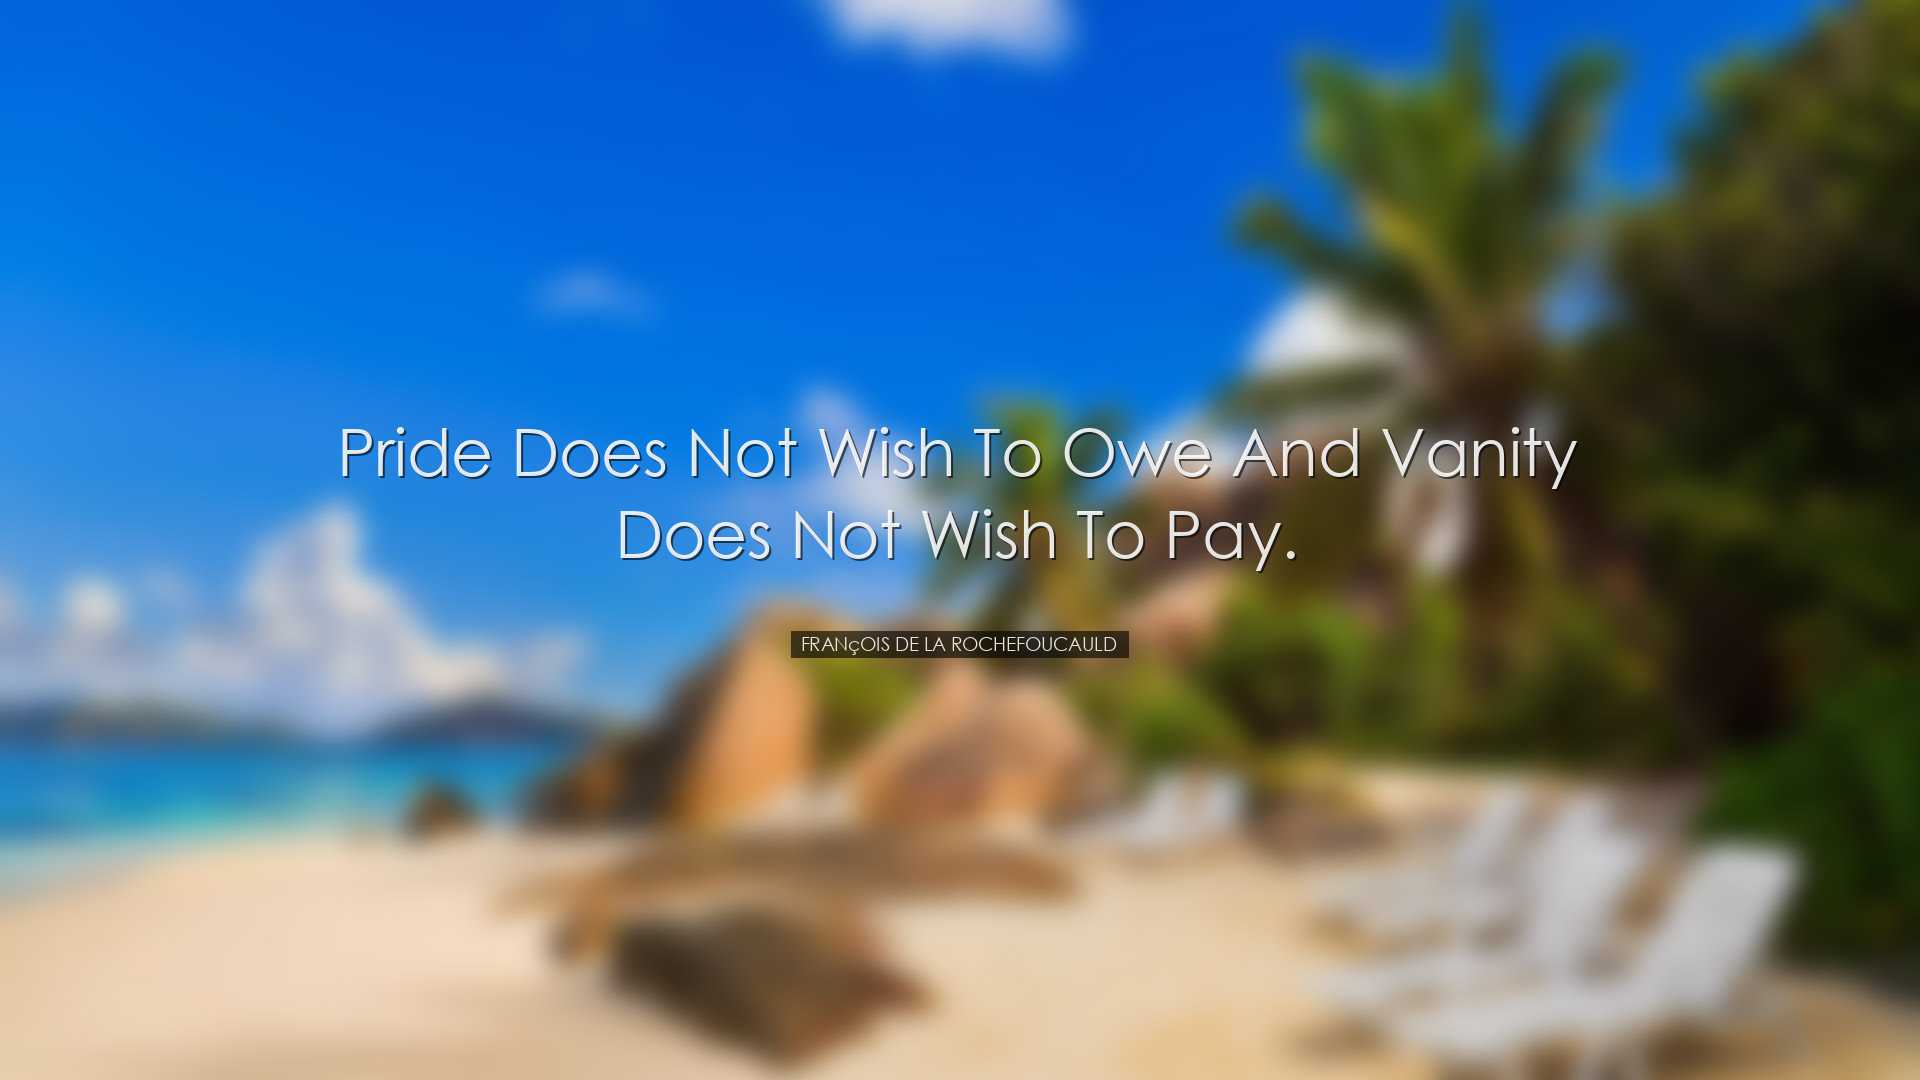 Pride does not wish to owe and vanity does not wish to pay. - Fran